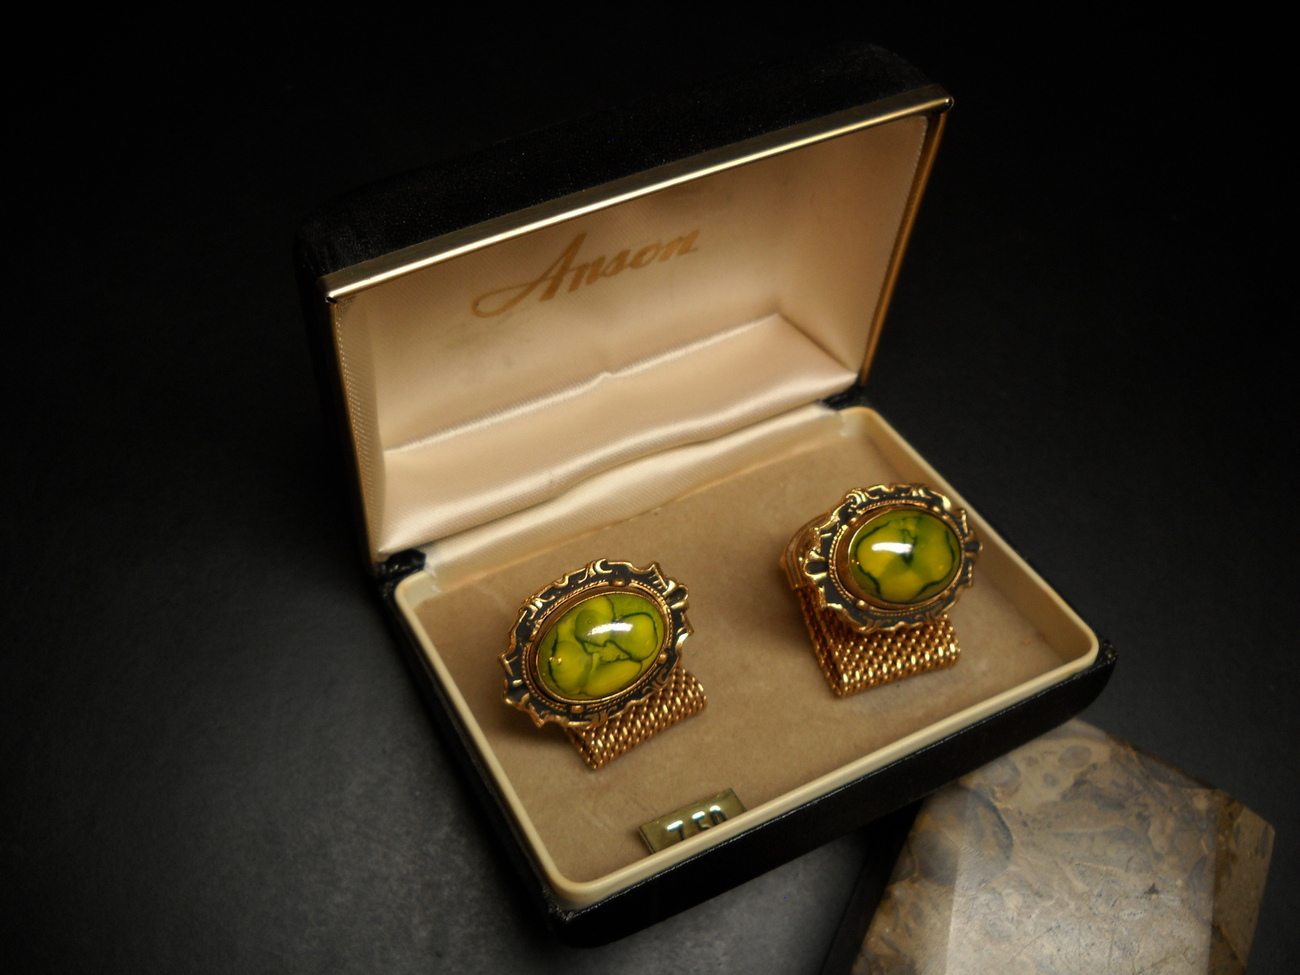 Anson Cuff Links Golden Color Mesh Wrap Green Veined Stones in Presentation Box - $24.99